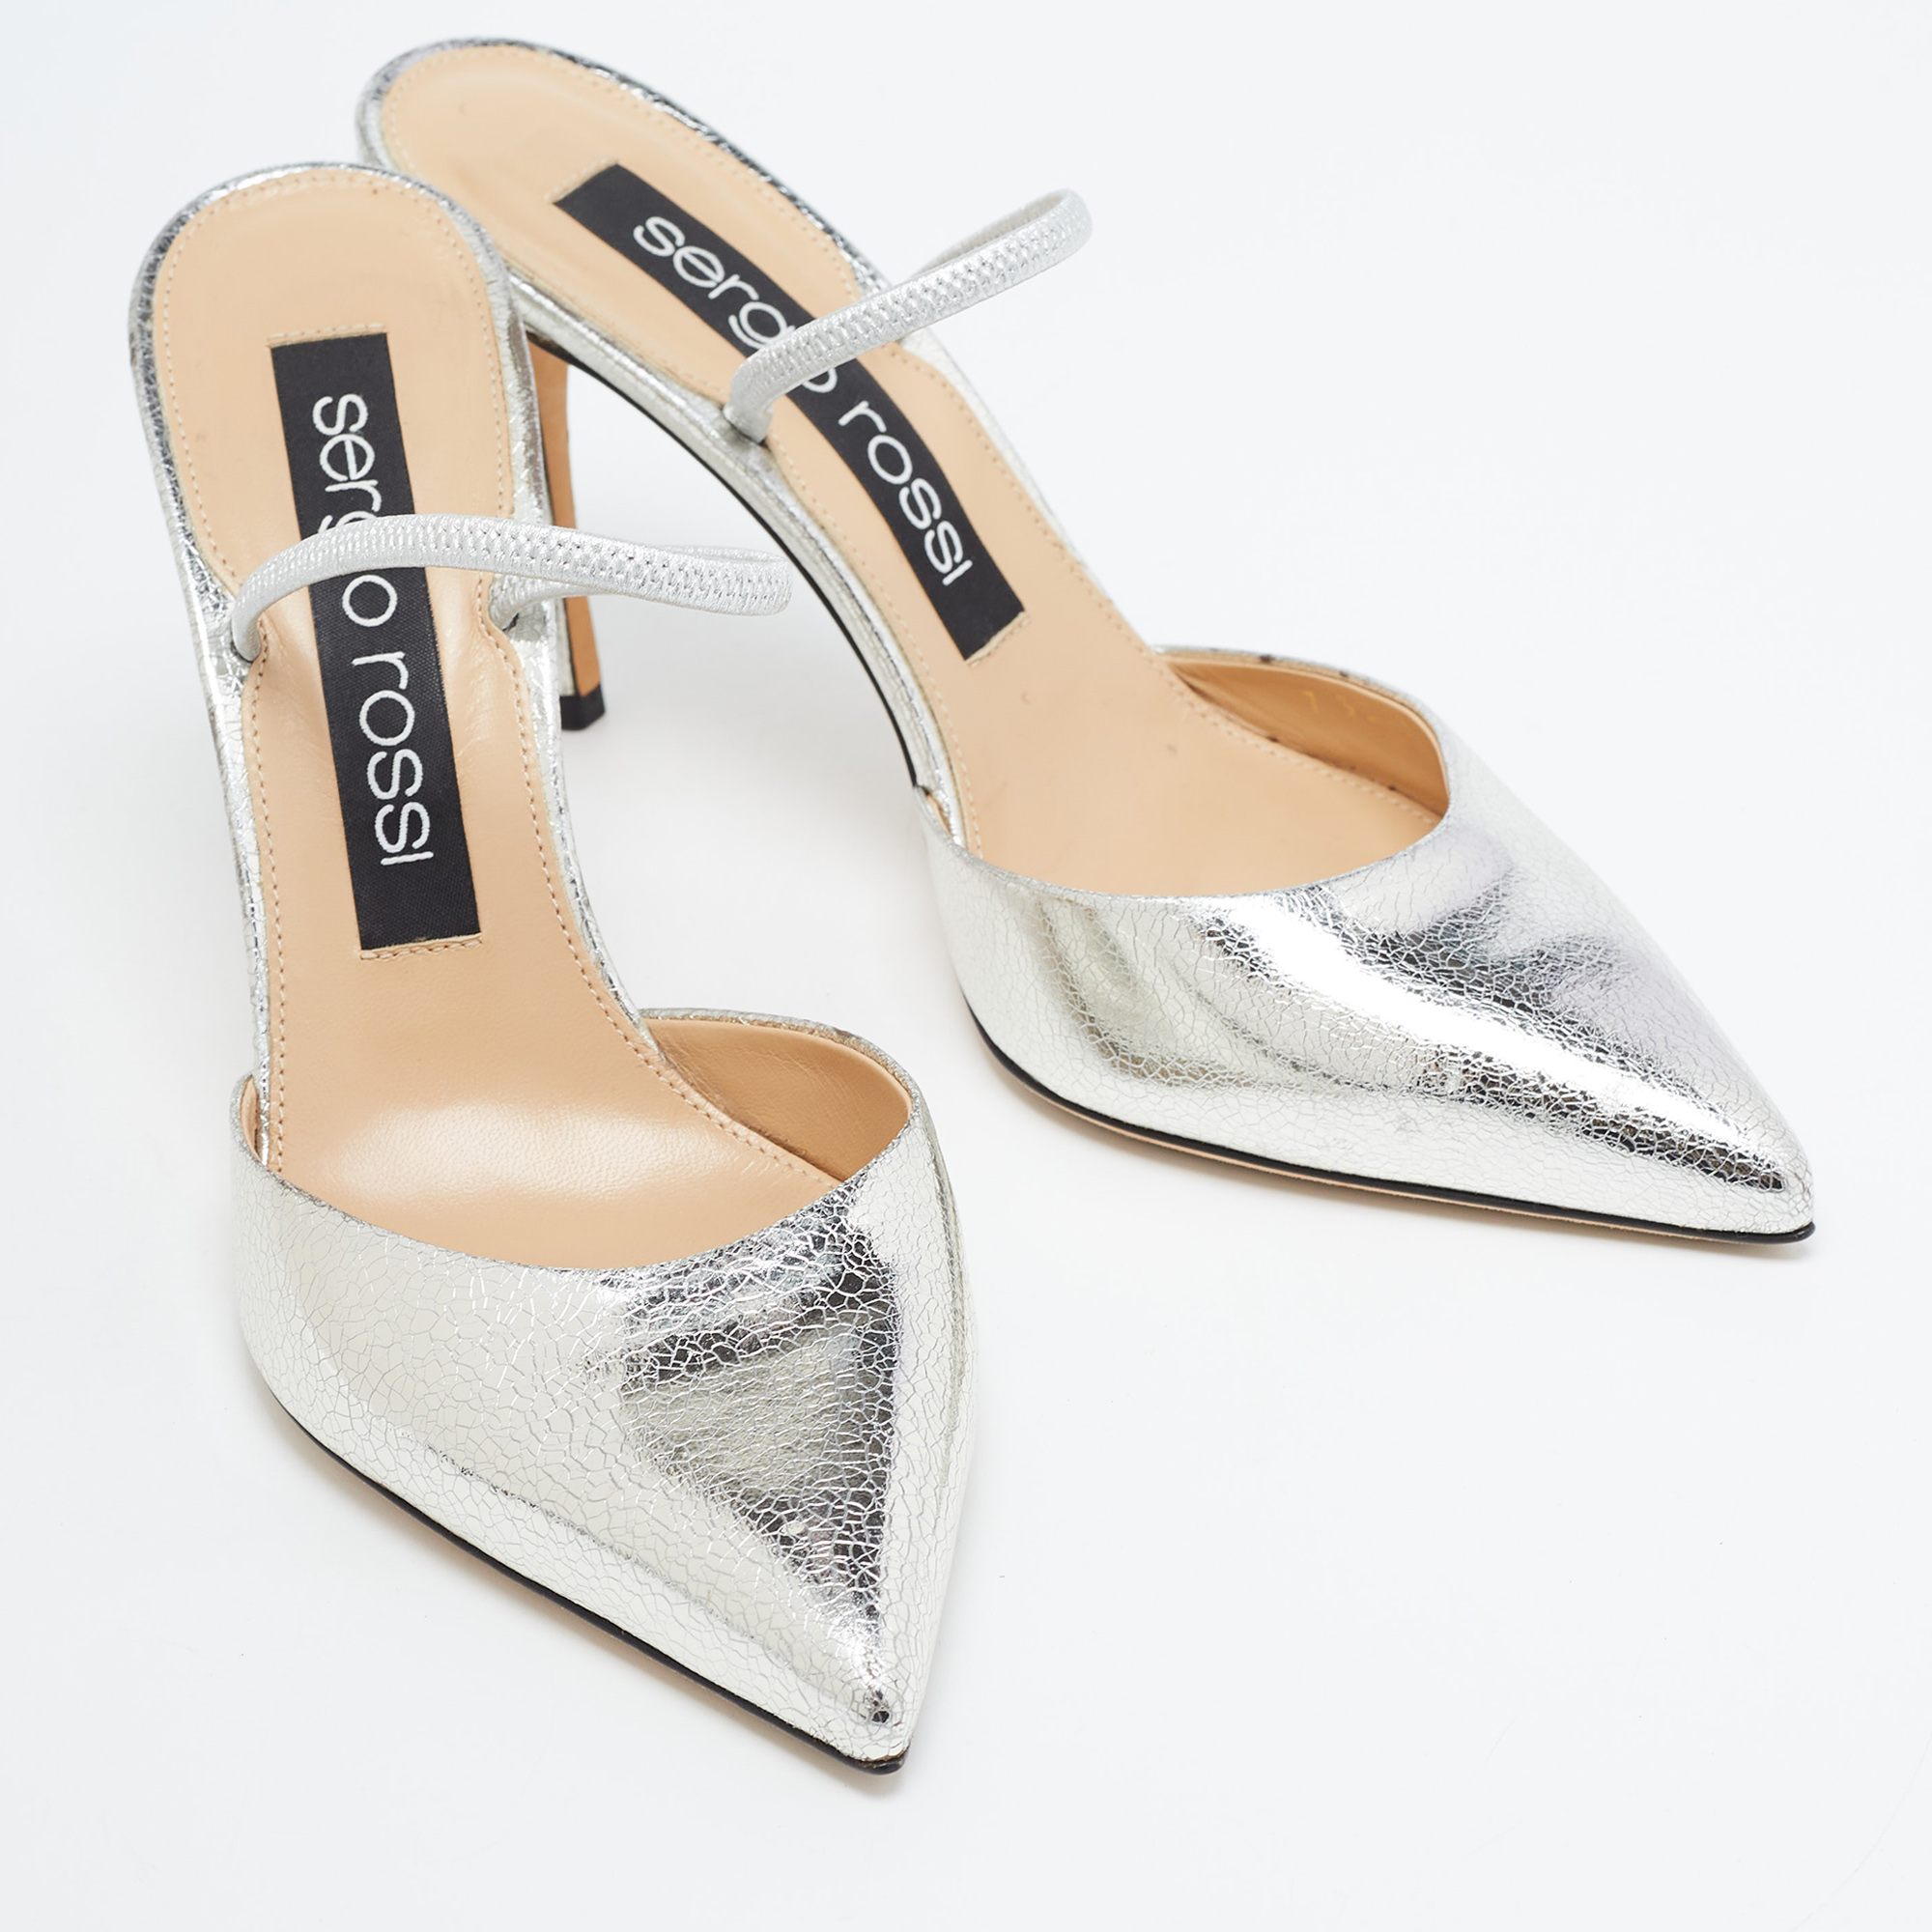 Sergio Rossi Silver Leather Embellished Slingback Pumps Size 38